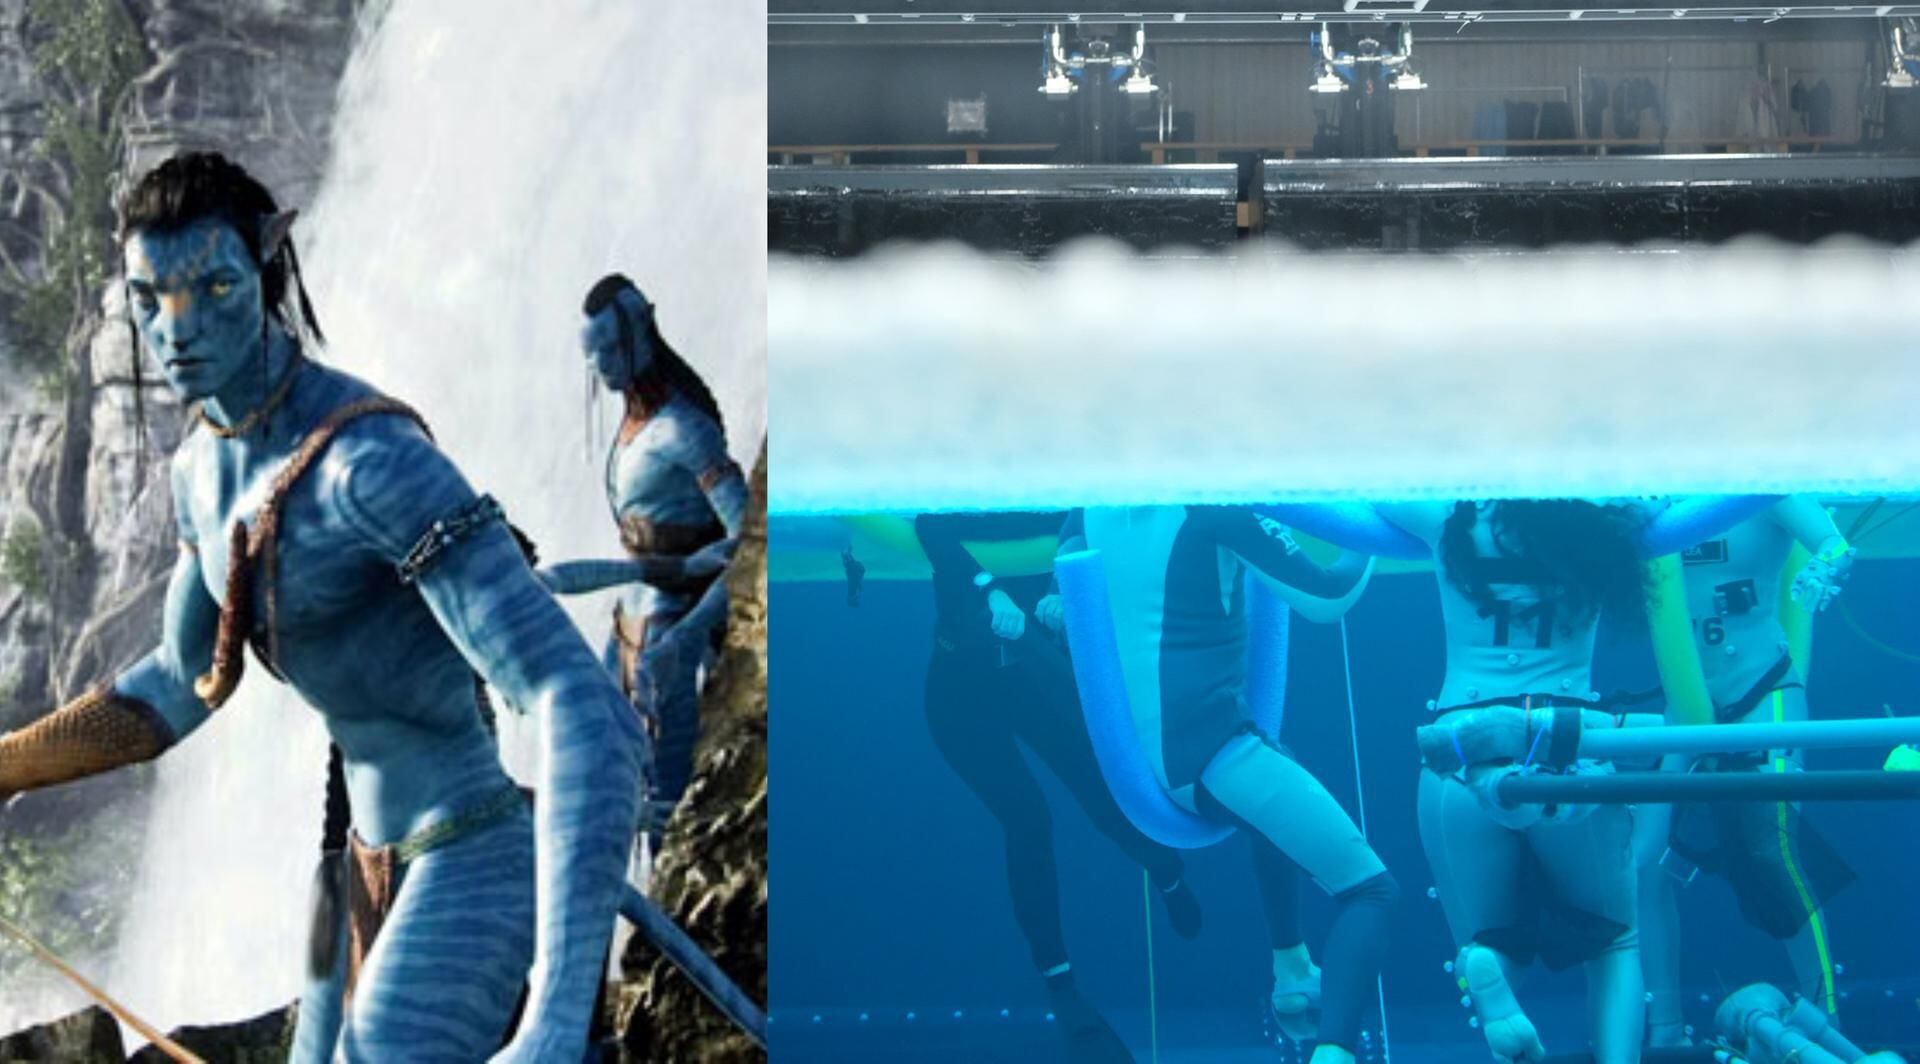 Avatar 2 Set Photos Reveal New Look At Sequels Underwater Filming Images